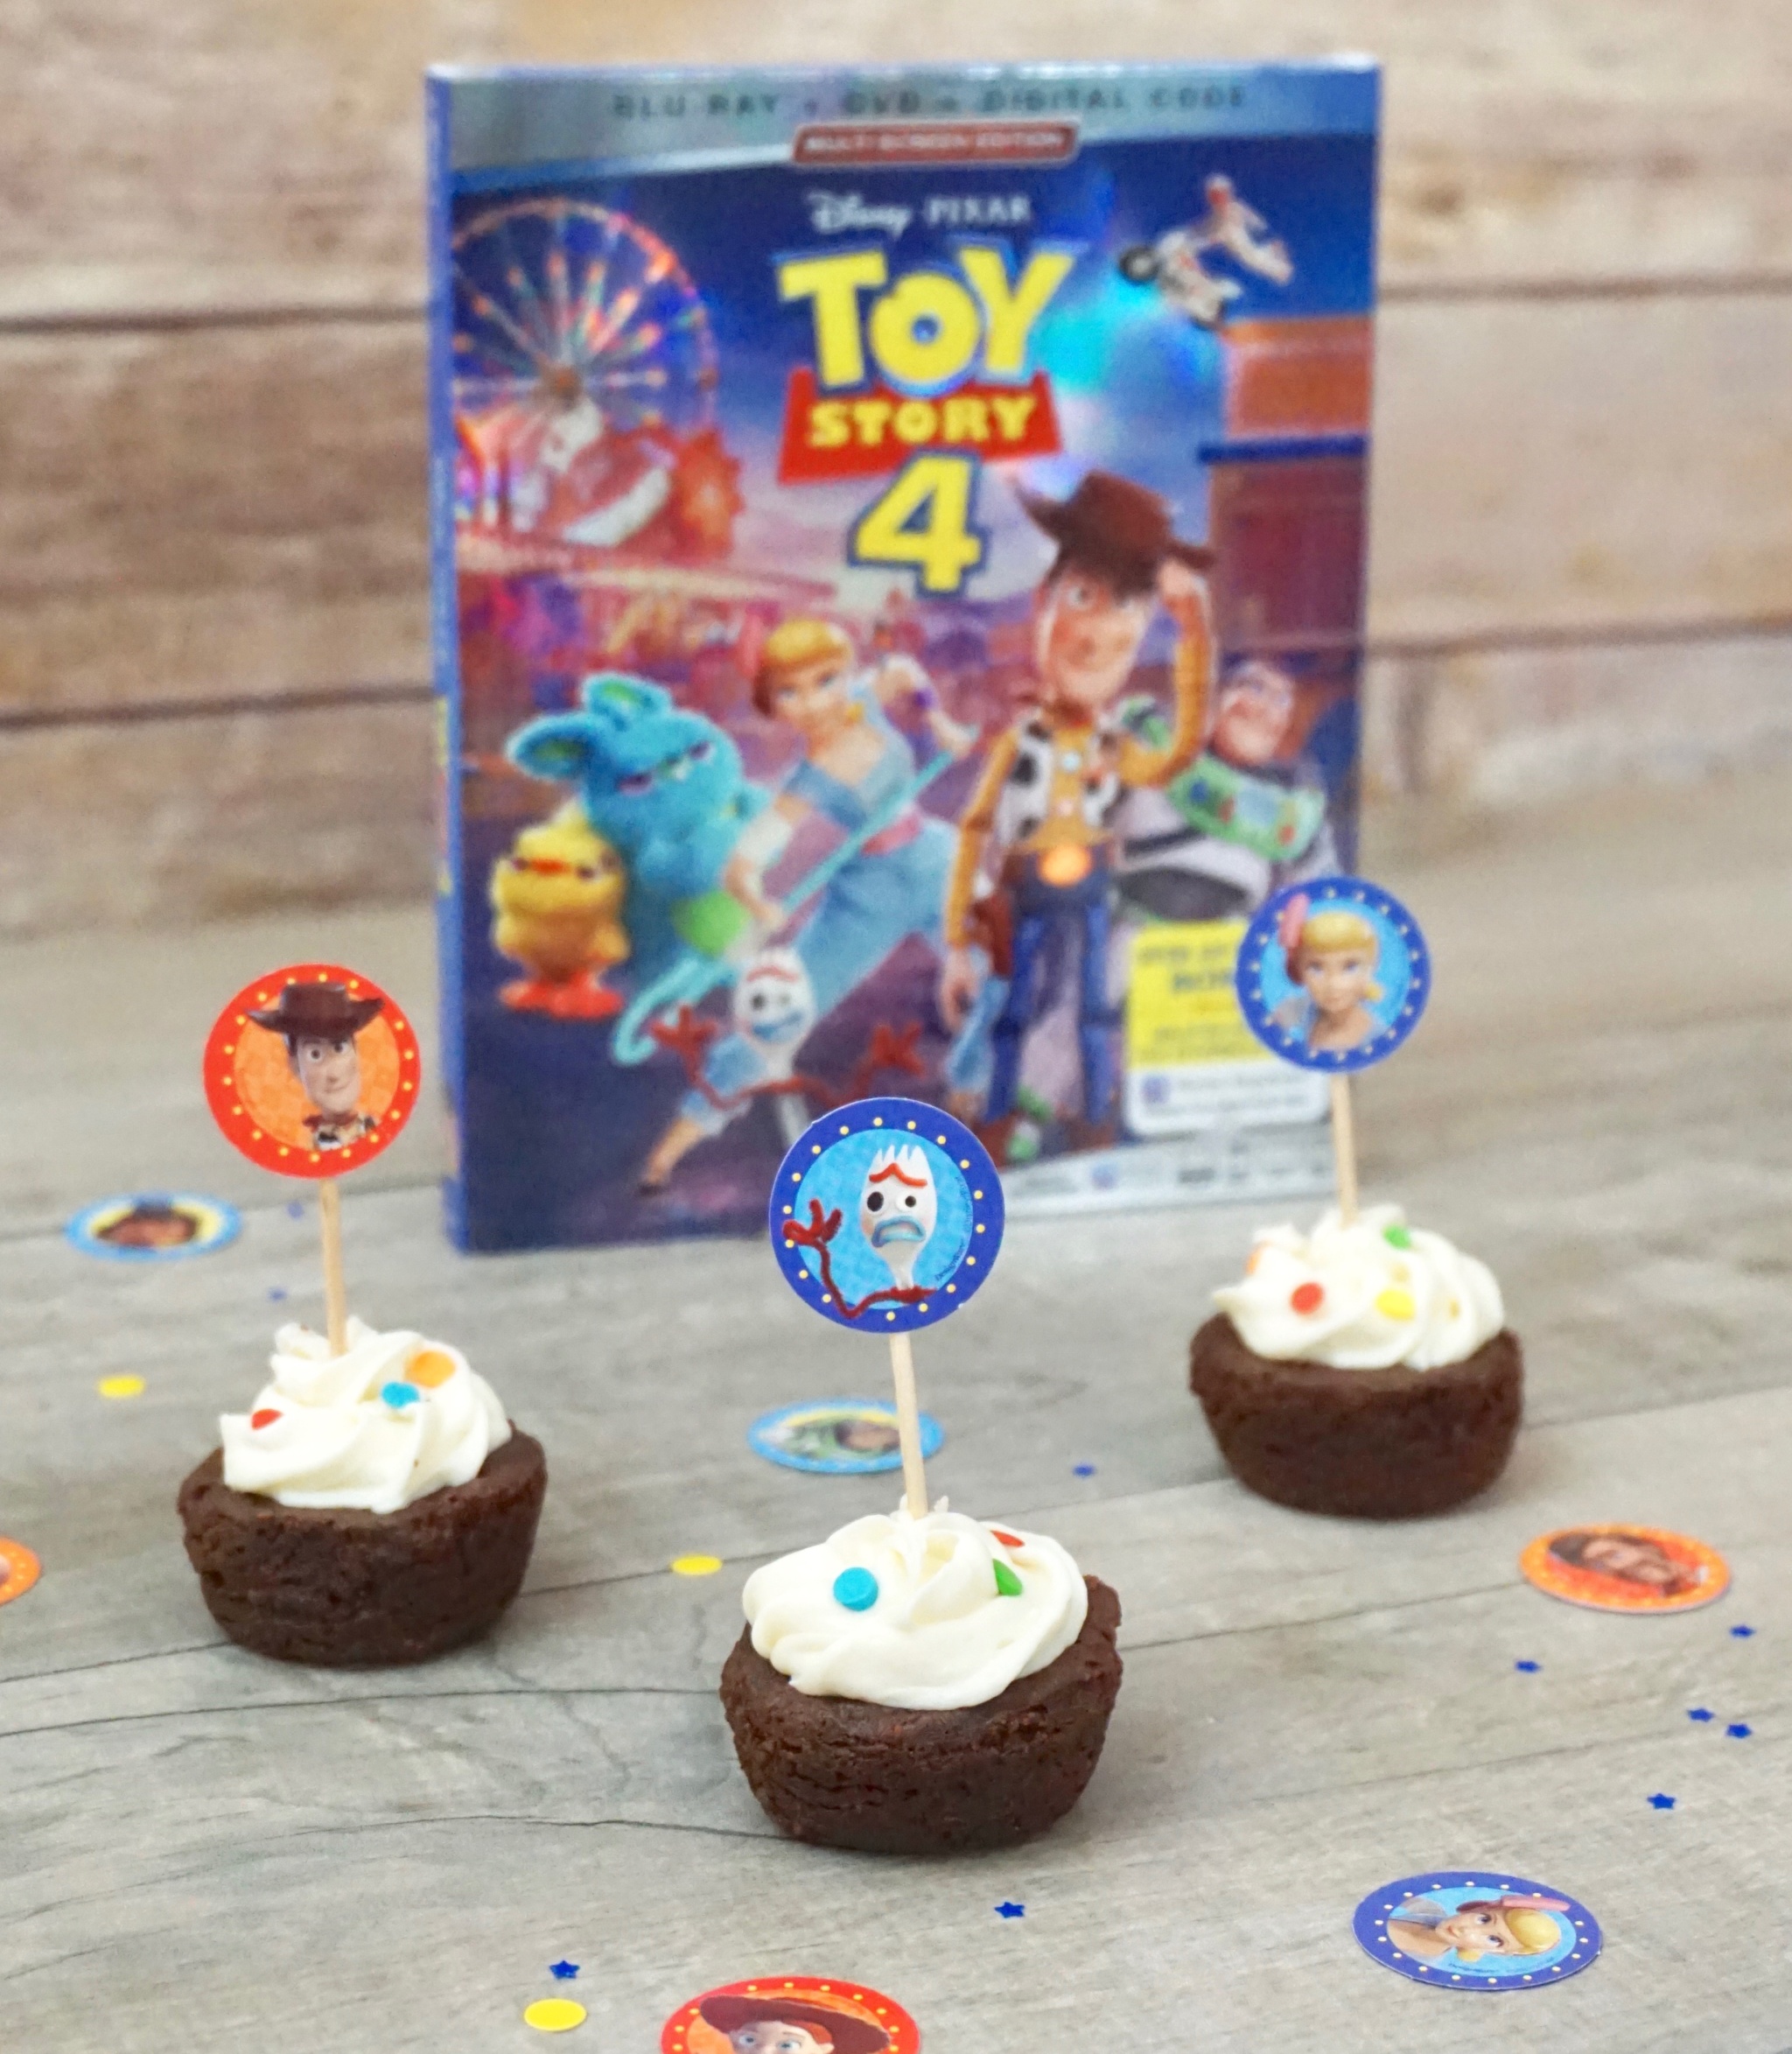 Toy Story 4 giveaway